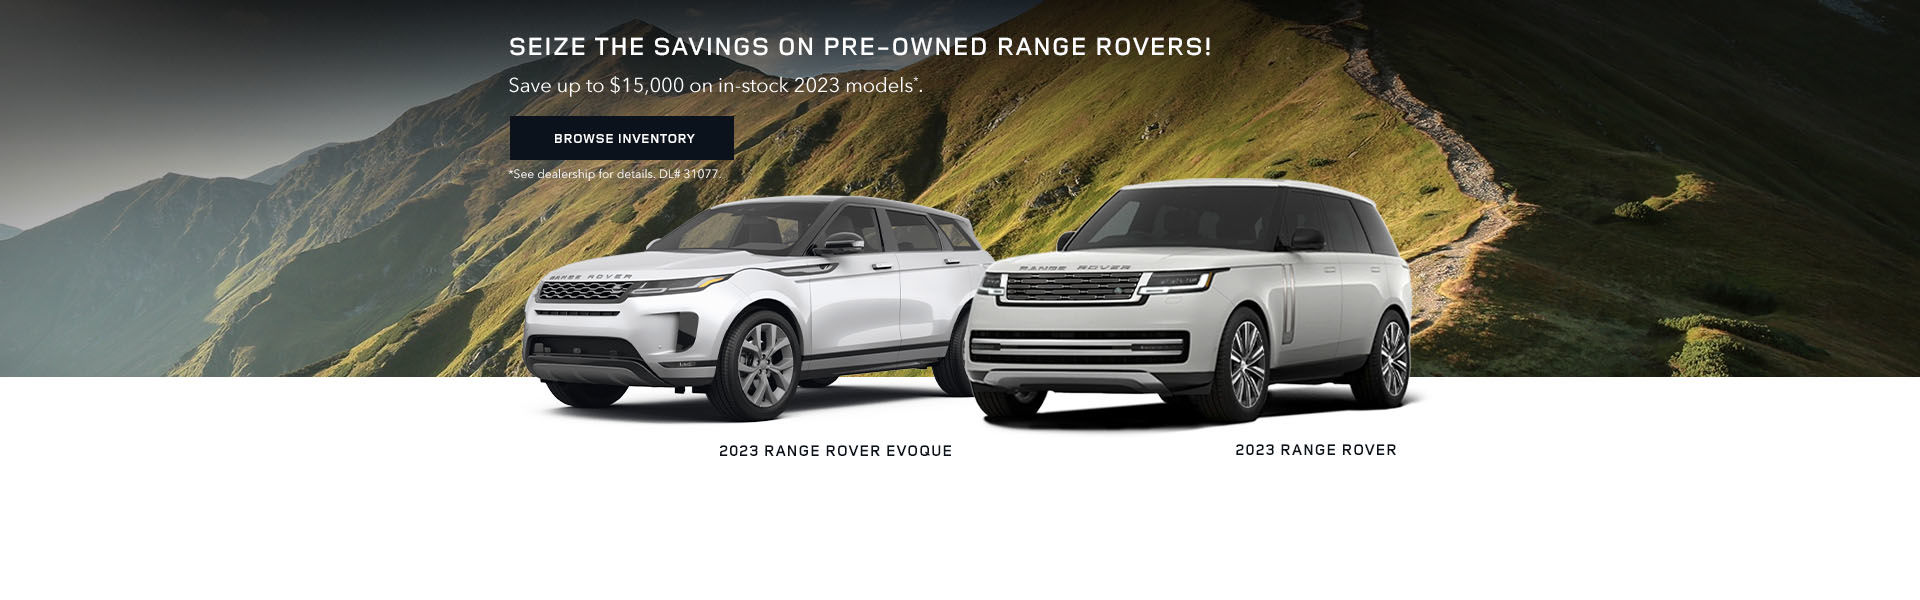 Seize the Savings on Pre-owned Range Rovers!